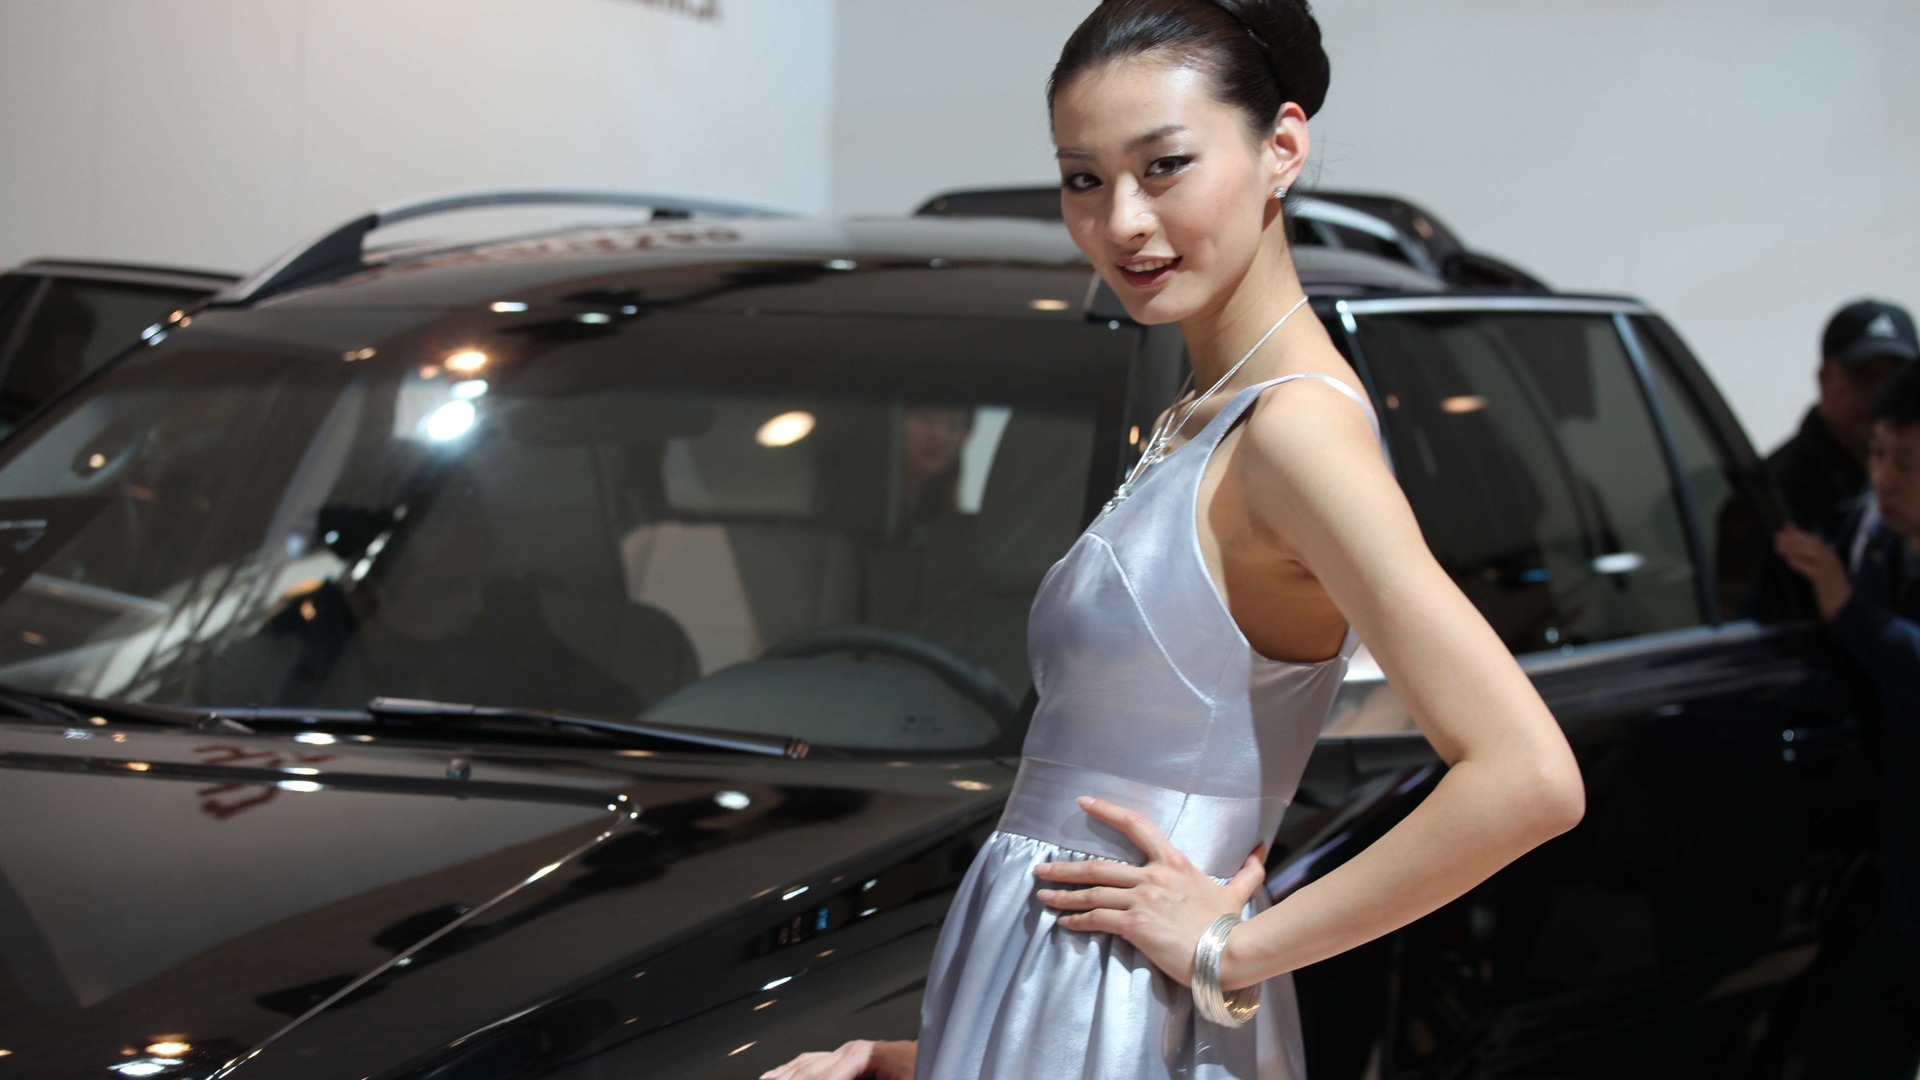 2010 Beijing International Auto Show beauty (2) (the wind chasing the clouds works) #25 - 1920x1080